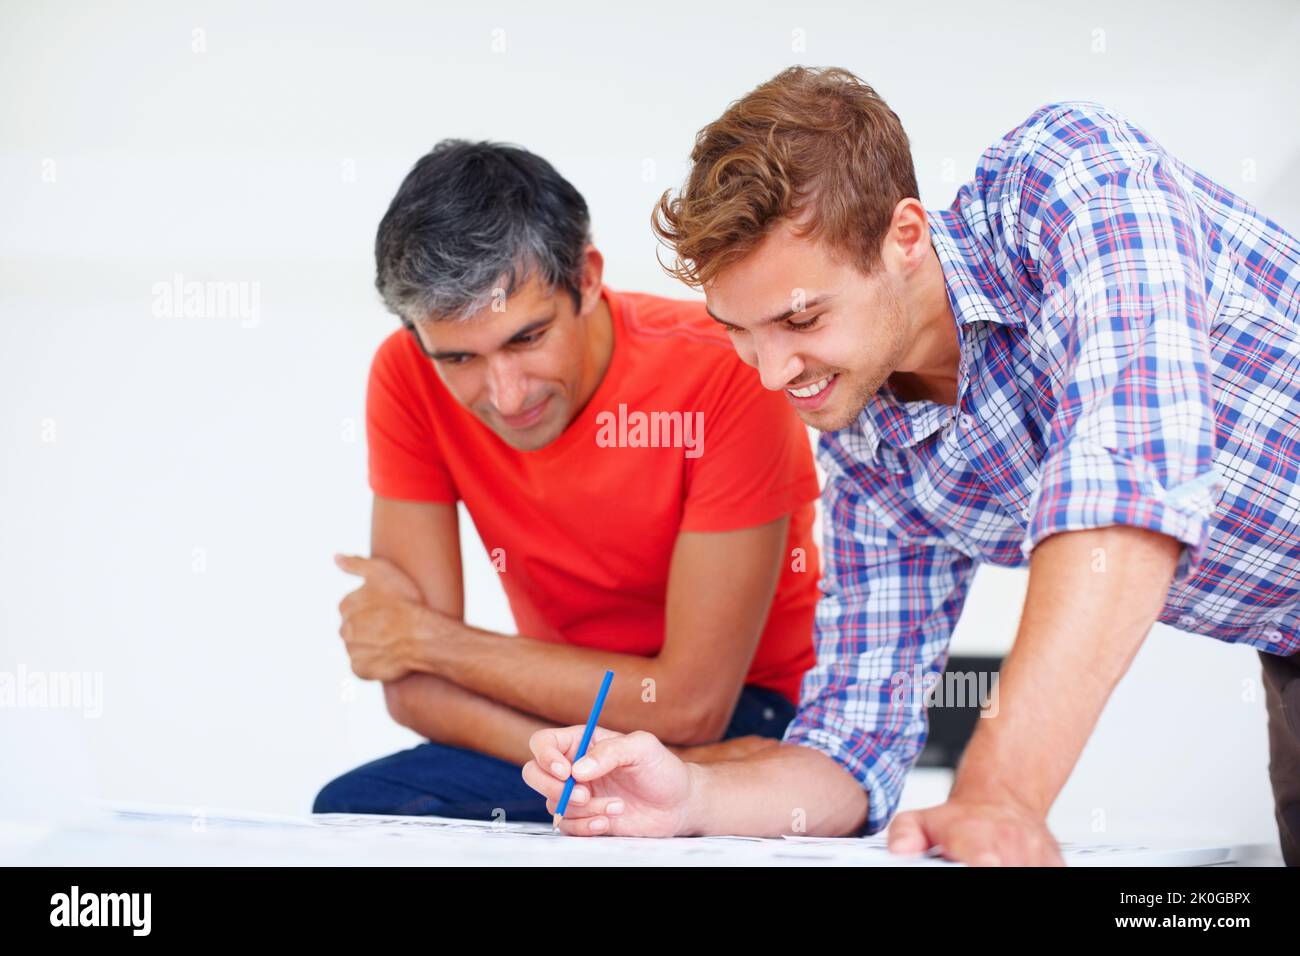 Photographers at work. Young professional photographer discussing with his colleague at work. Stock Photo